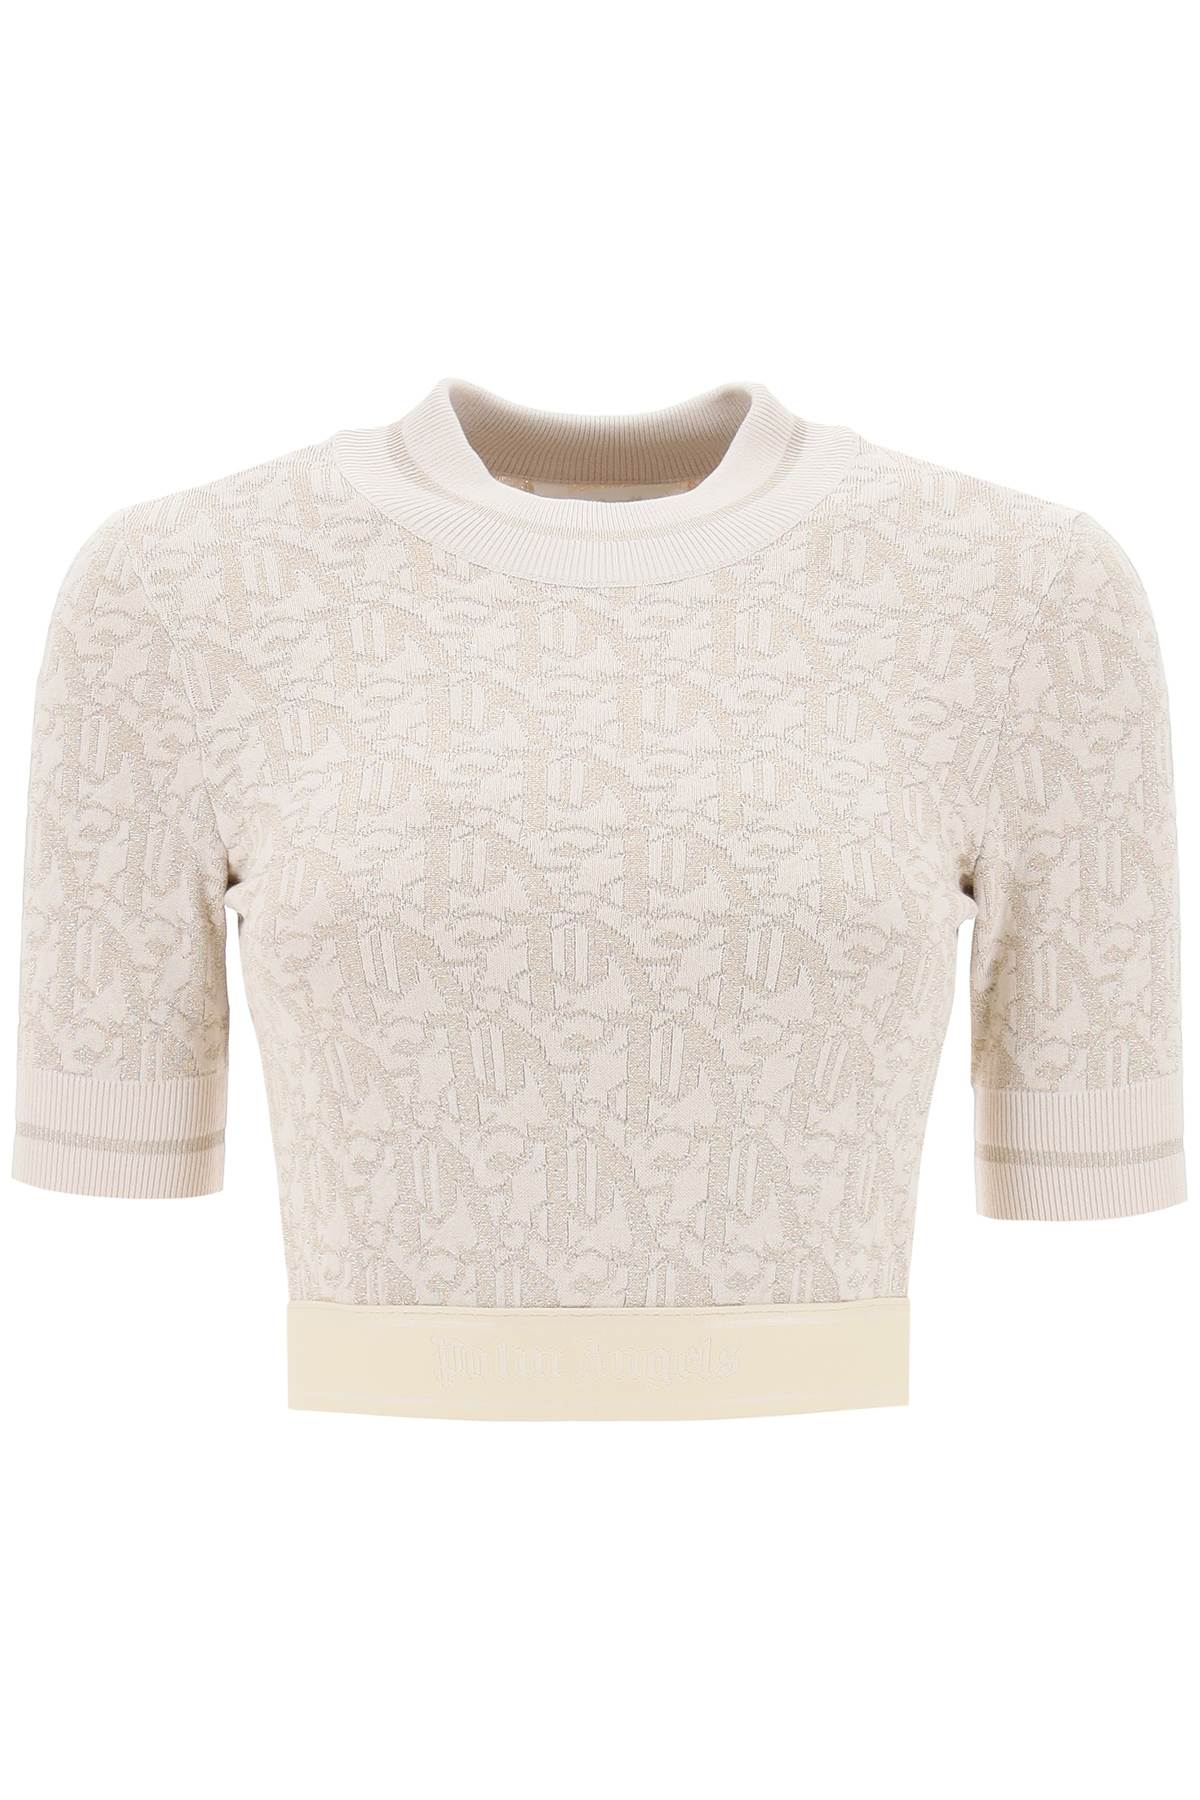 PALM ANGELS Feminine and Fun Cropped Knit Top in Mixed Colors